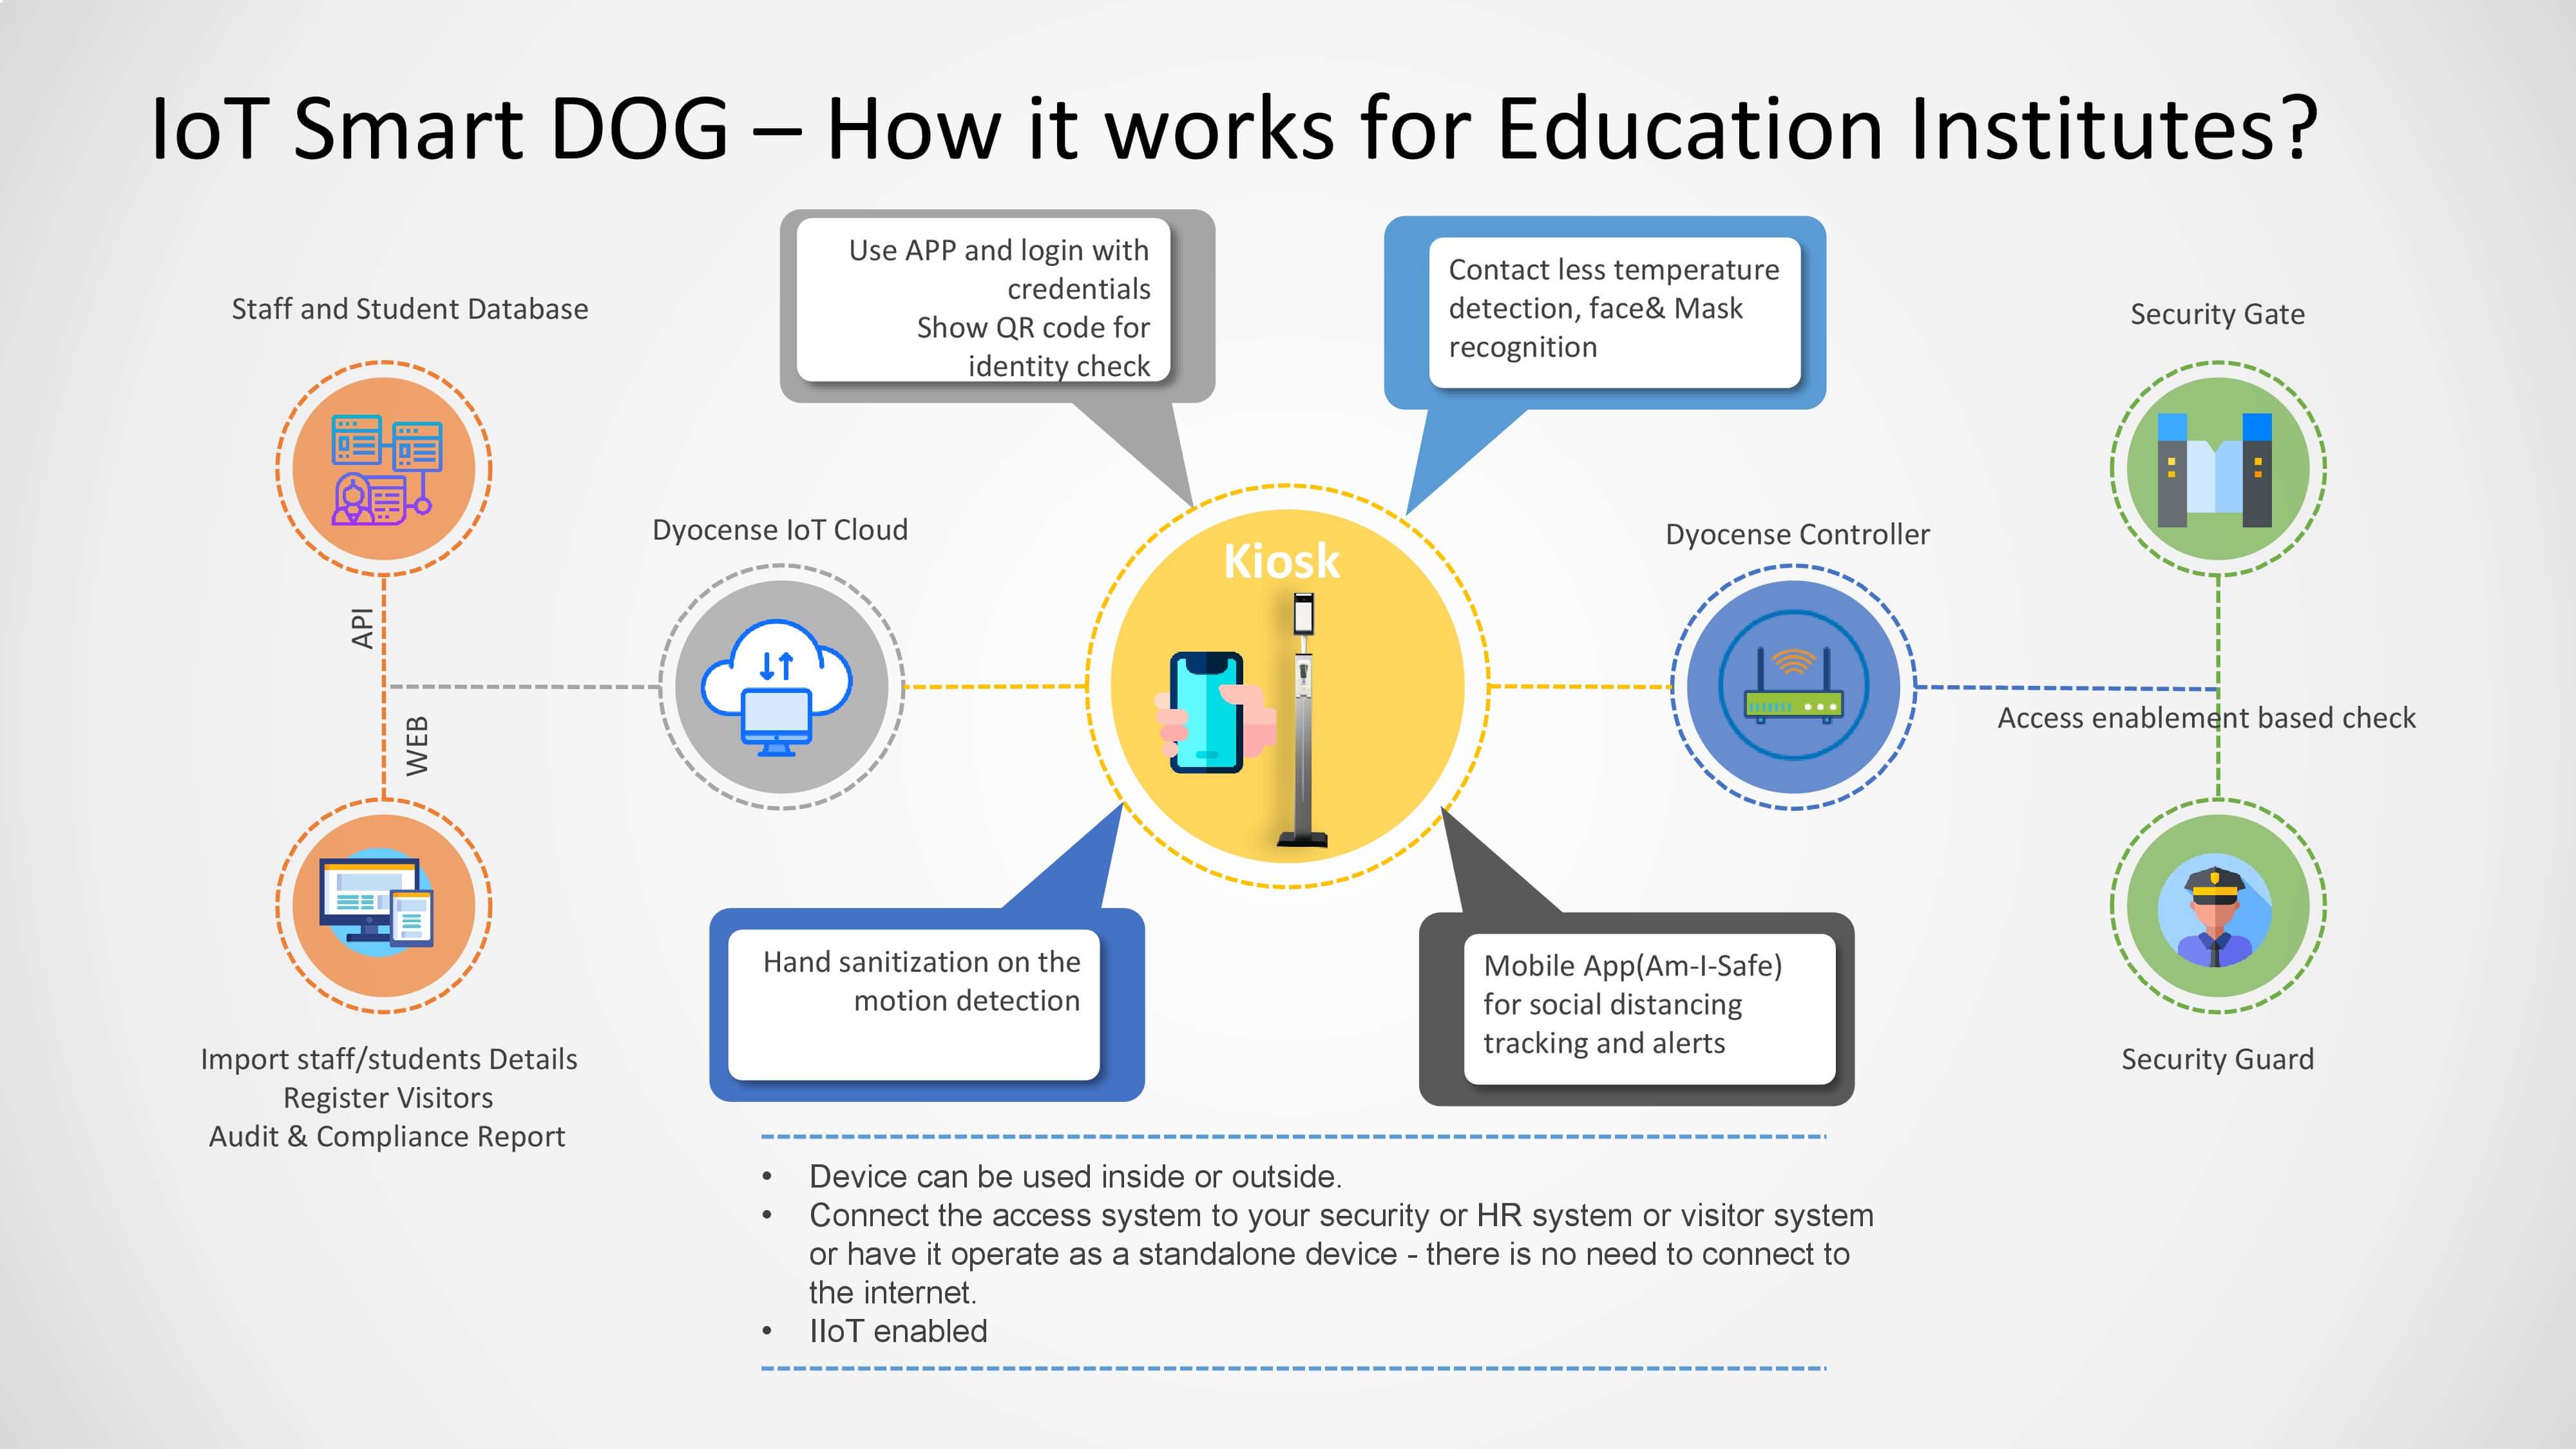 DyoCense IoT smart dog for Education Institutes poster